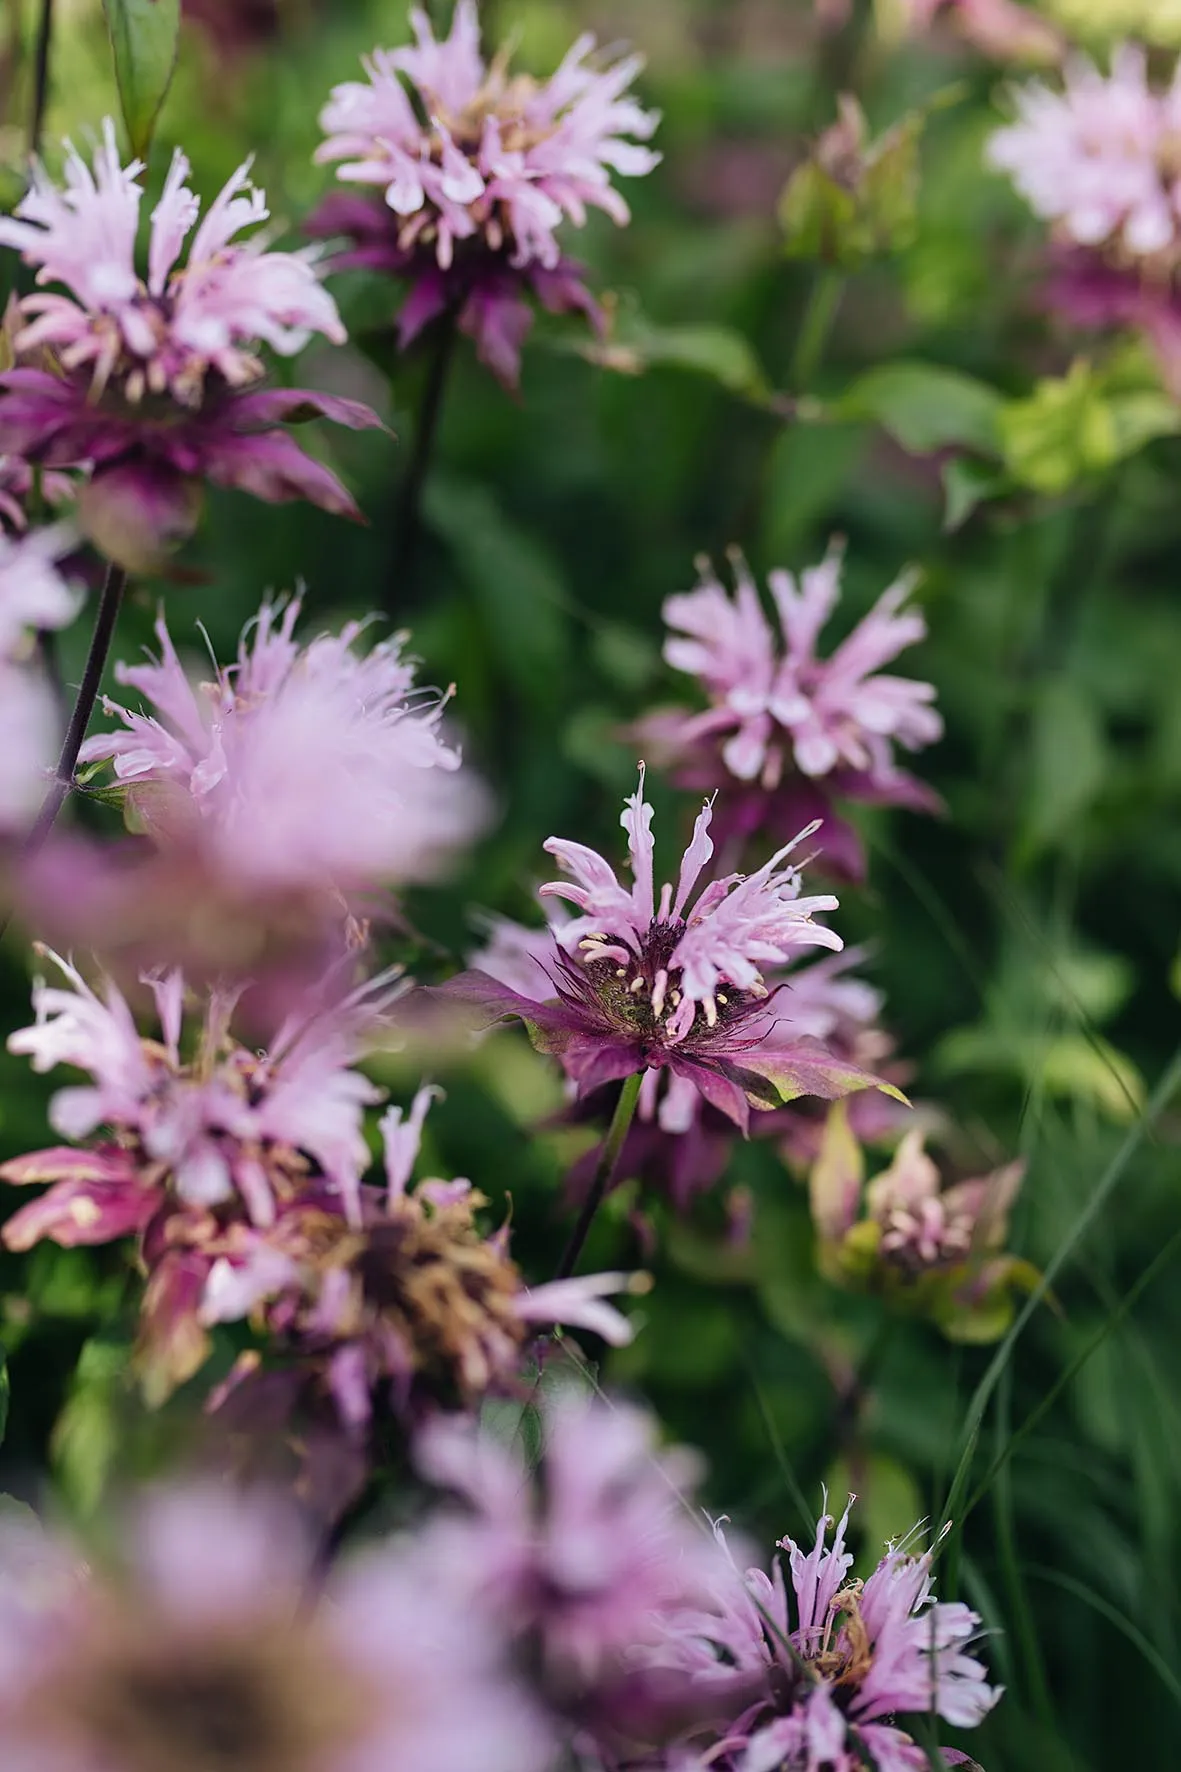 Monarda ‘Blaustrumpf’. A mint family member with luminous, purple whorls of tubular, two-lipped flowers, bee balm is highly attractive to pollinators. Needs a moist, well-drained soil. 90cm. RHS H4, USDA 4a-8b.